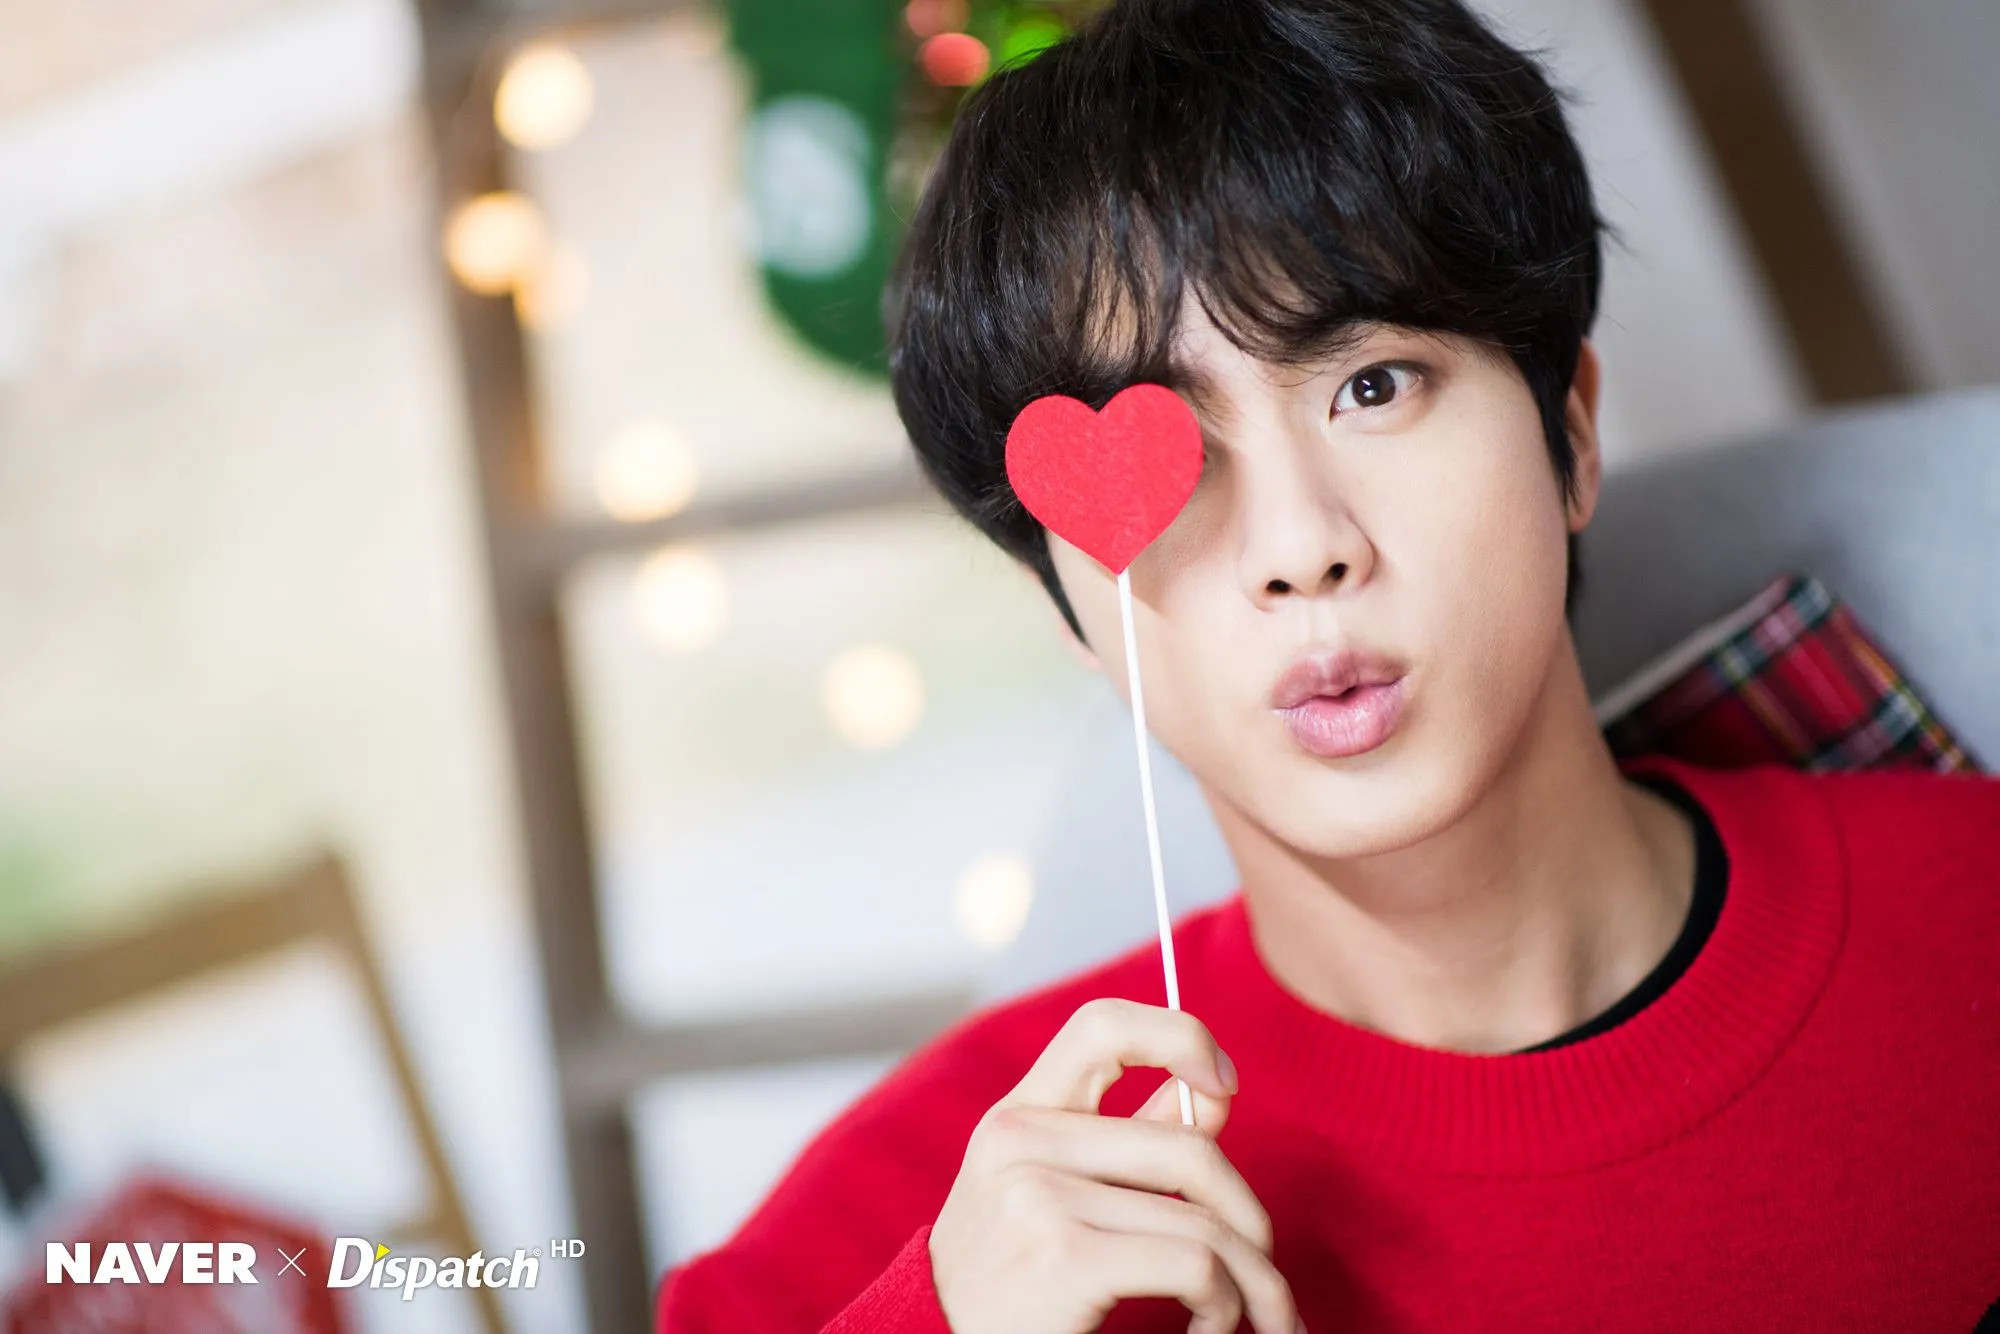 December 25 2019 BTS Jin Christmas Photoshoot By Naver X Dispatch